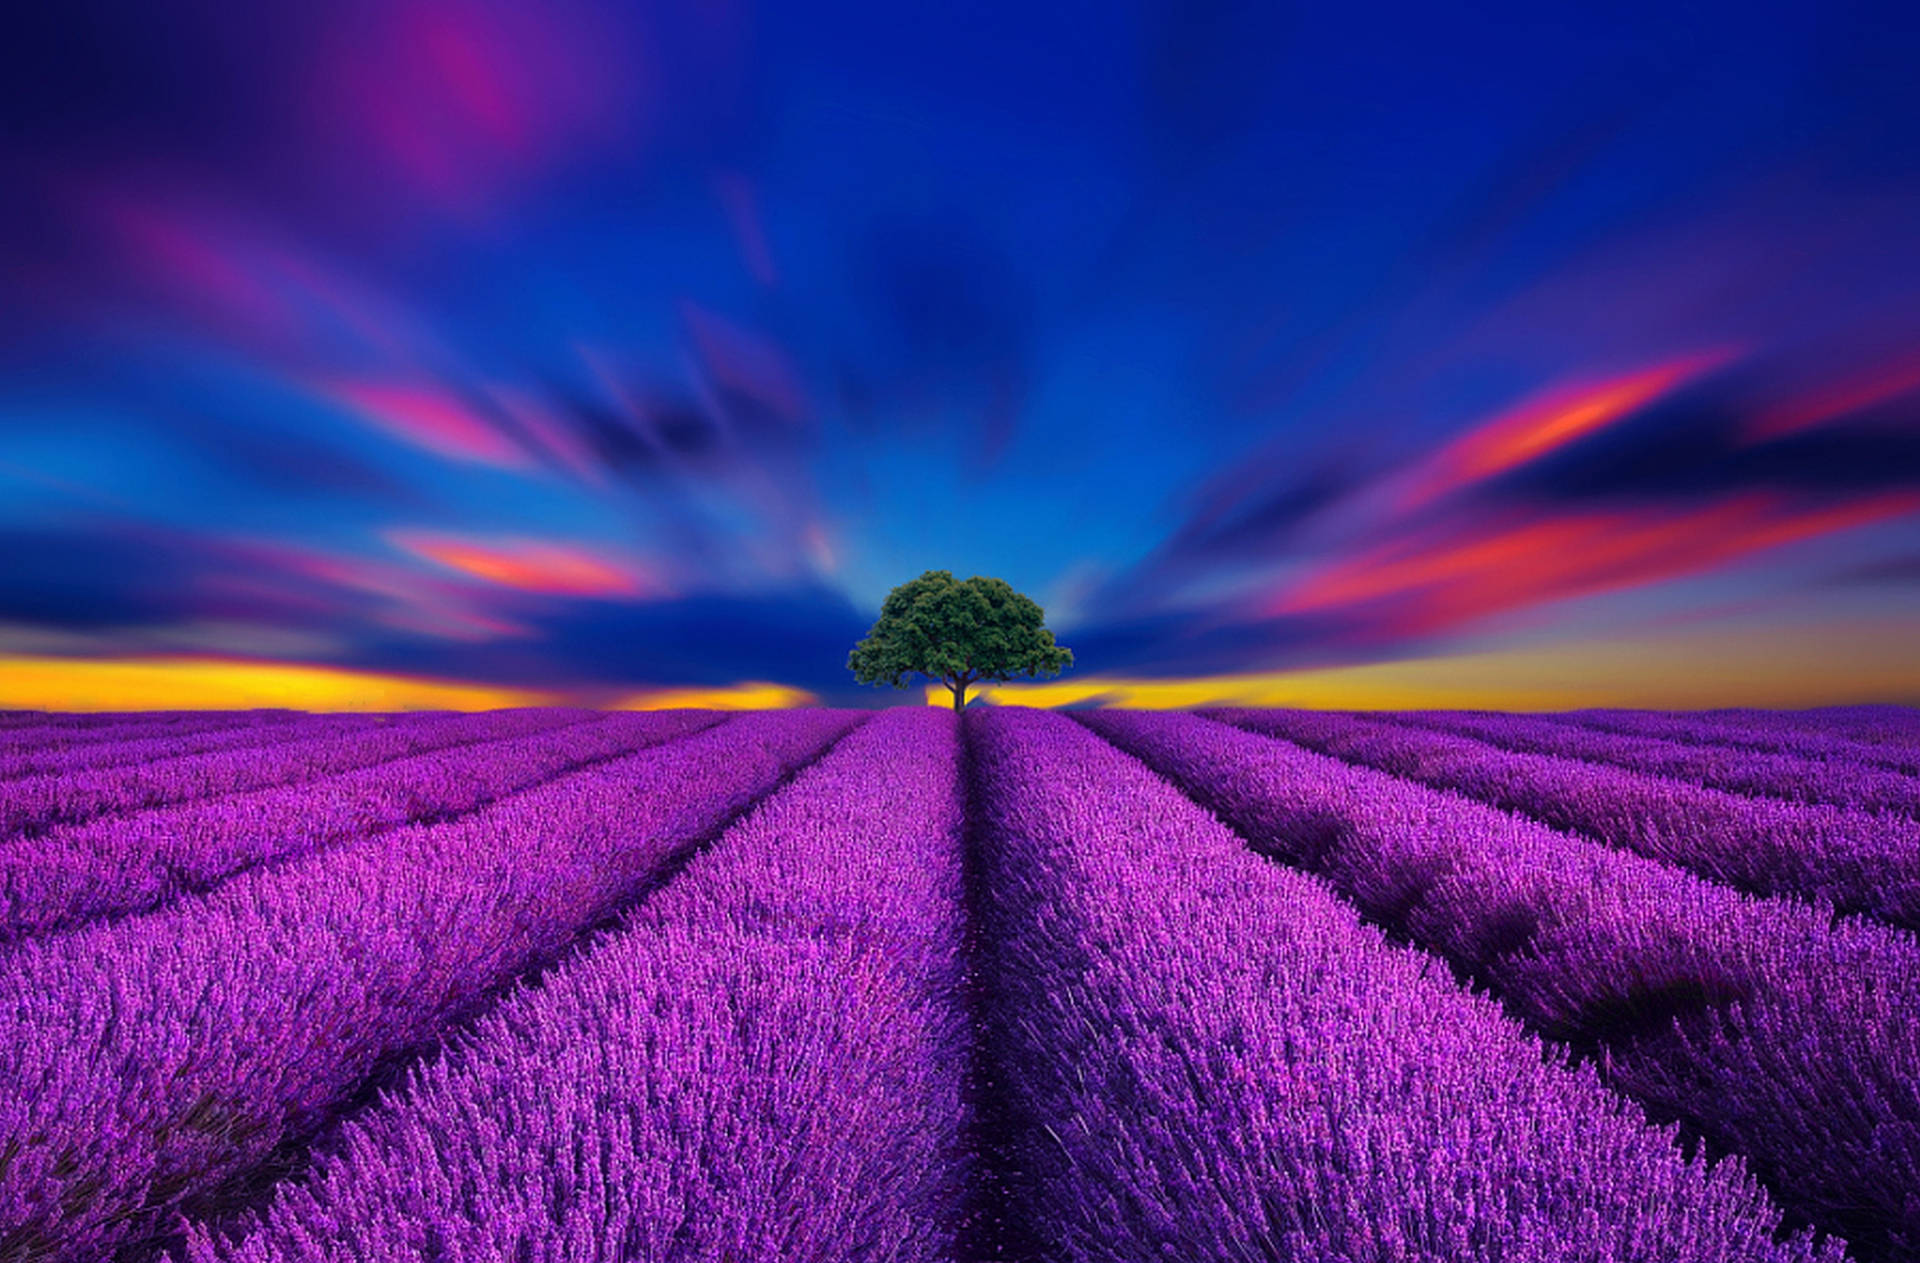 Lavender Aesthetic Field And Vibrant Blue Skies Wallpaper